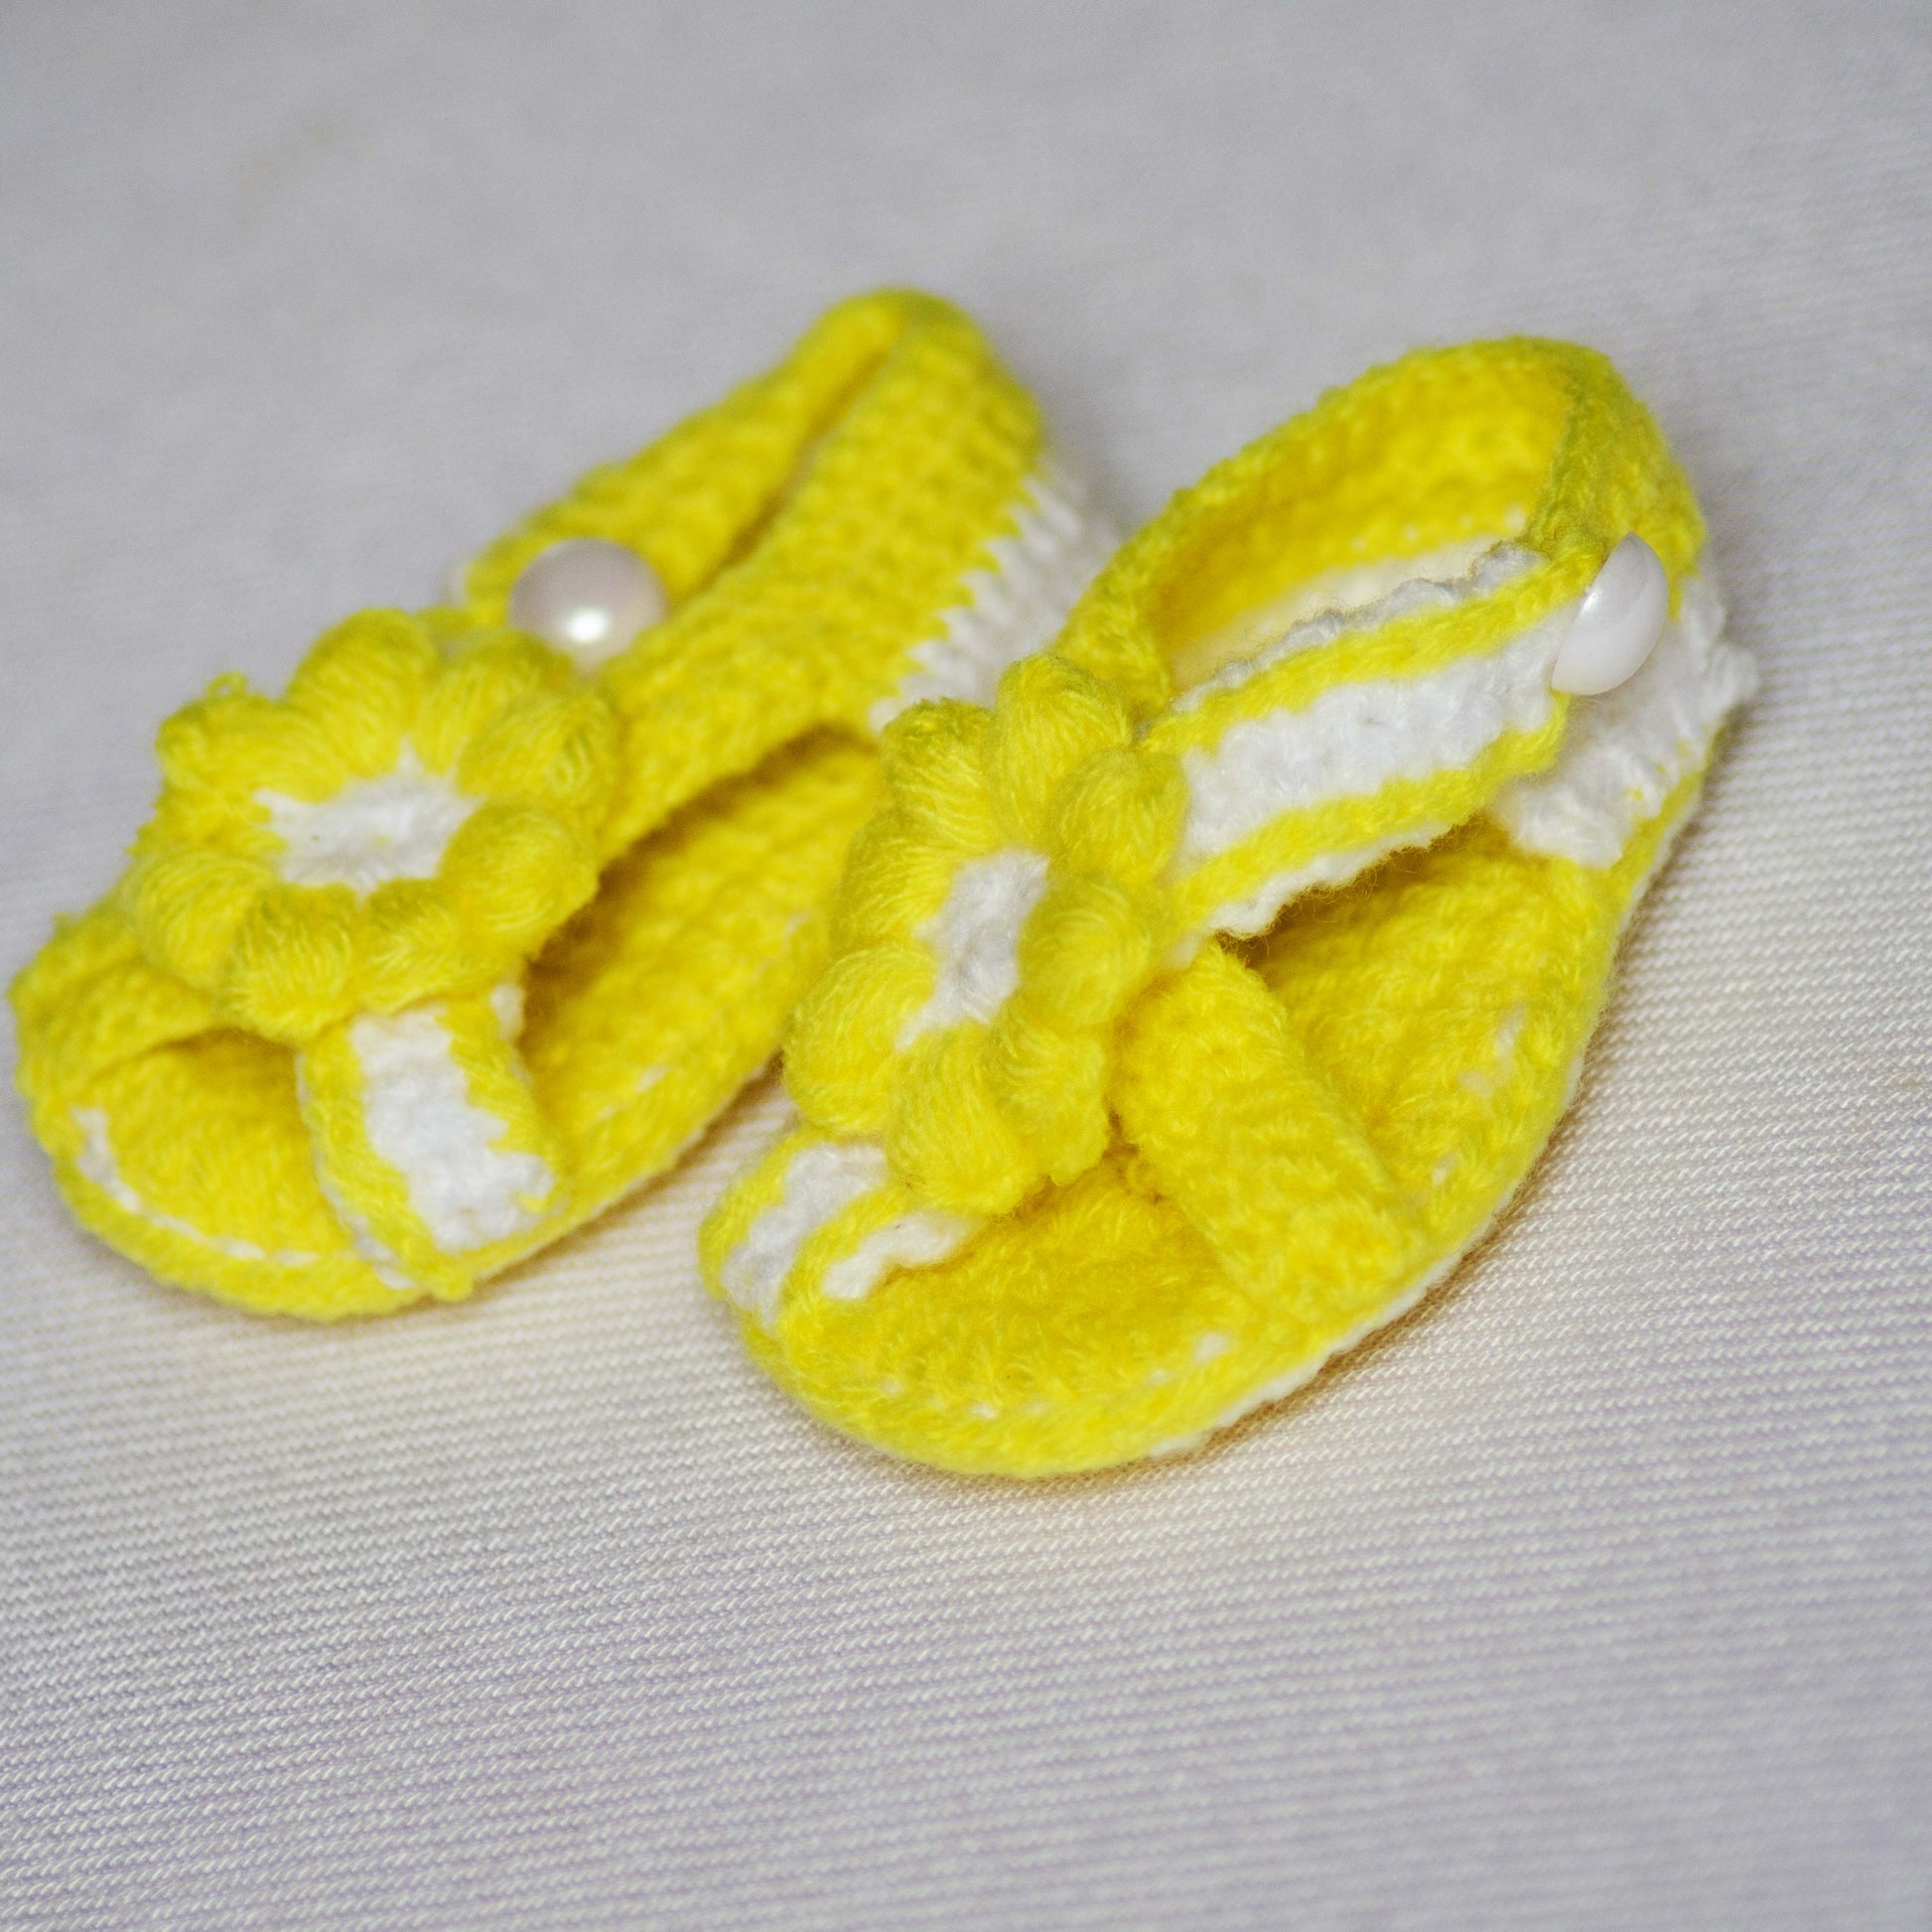 Handmade Crochet / Knitted Baby Shoes/Sandals - BabySpace Shop